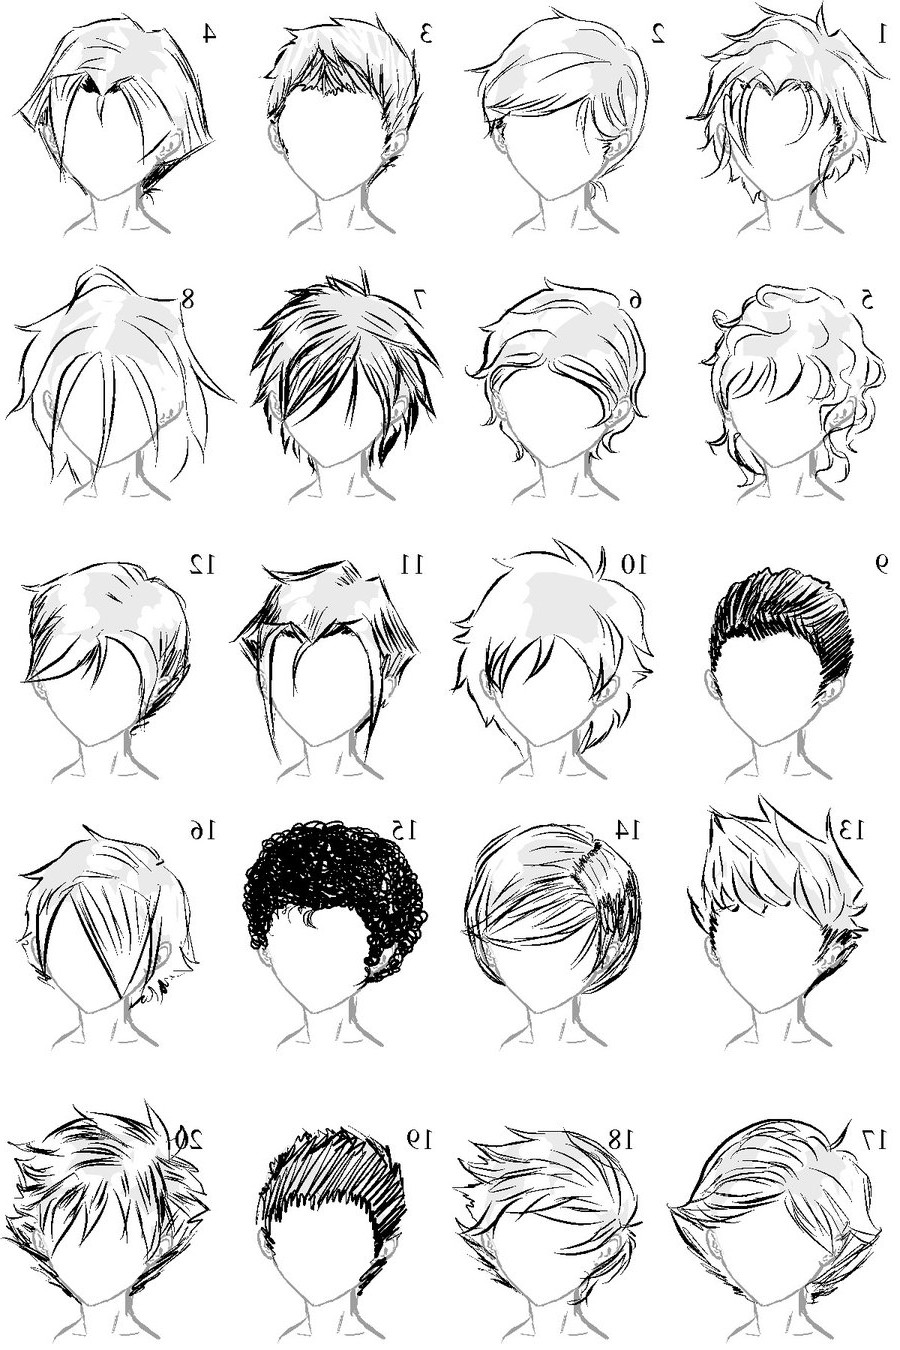 Boy Hairstyles Anime
 Male Anime Hairstyles Drawing at PaintingValley